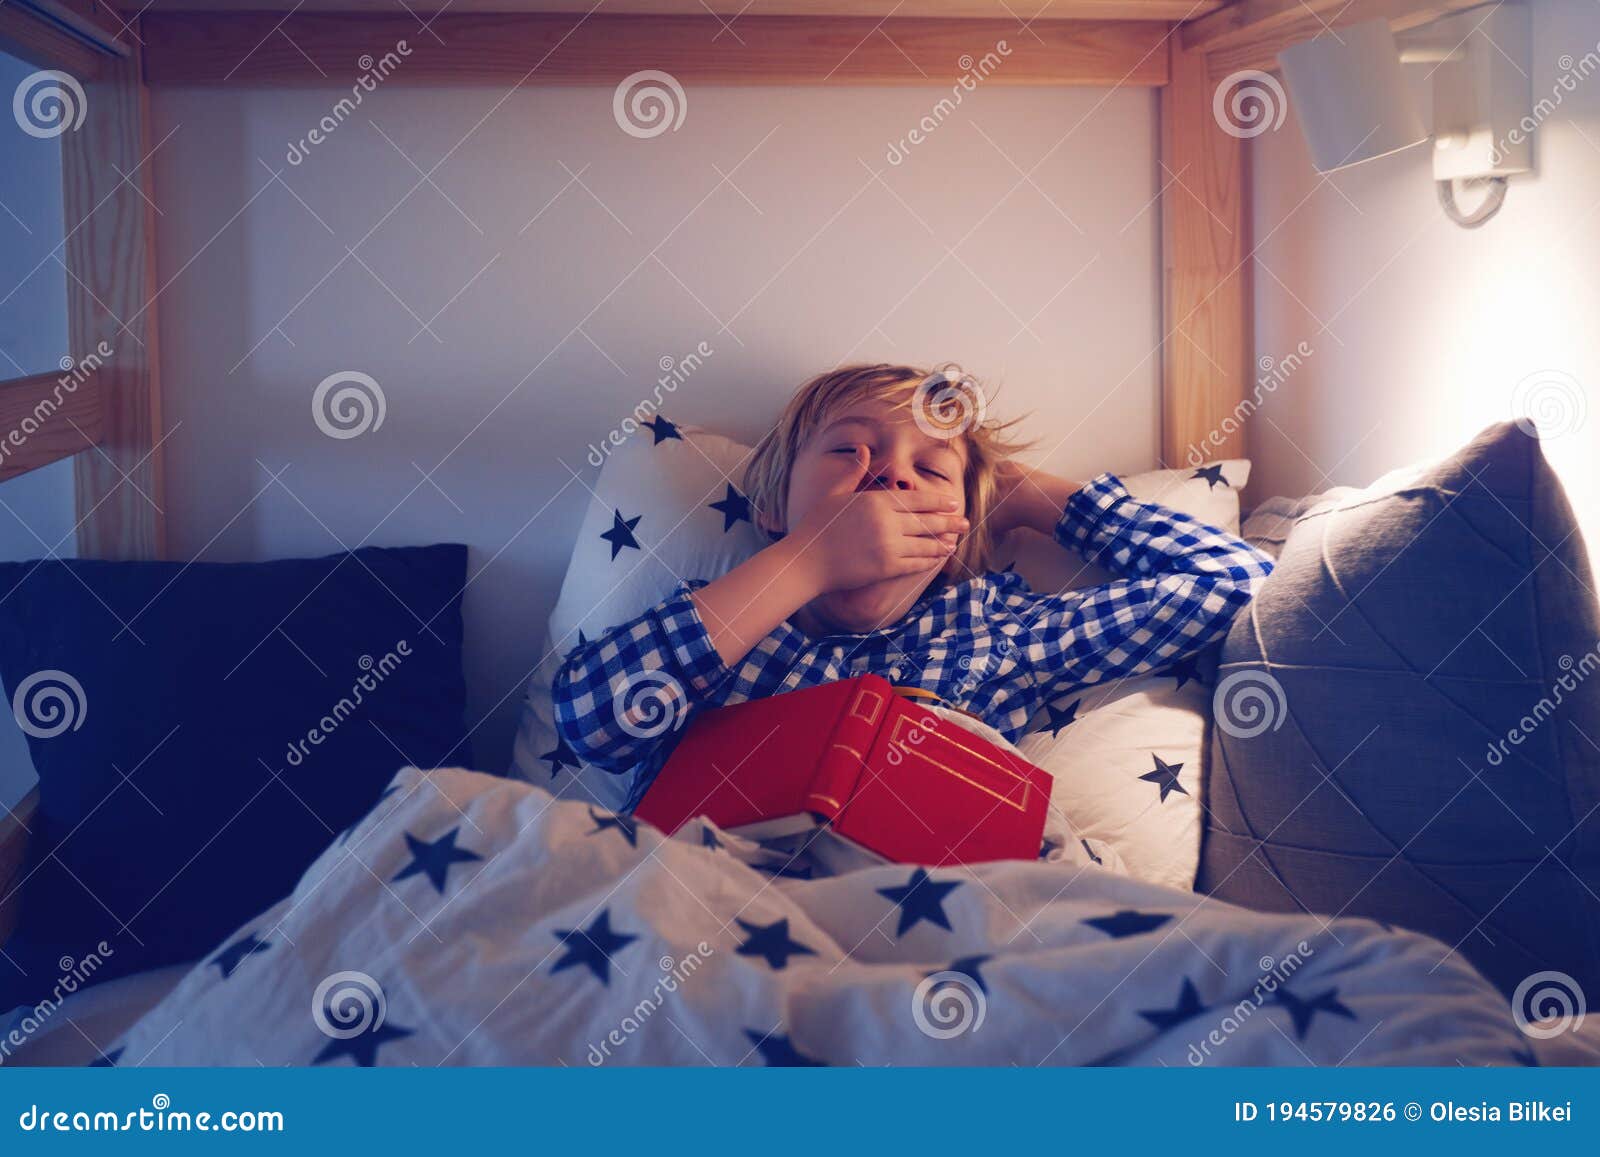 Young Boy Yawning While Laying In The Bed And Reading A Book Before